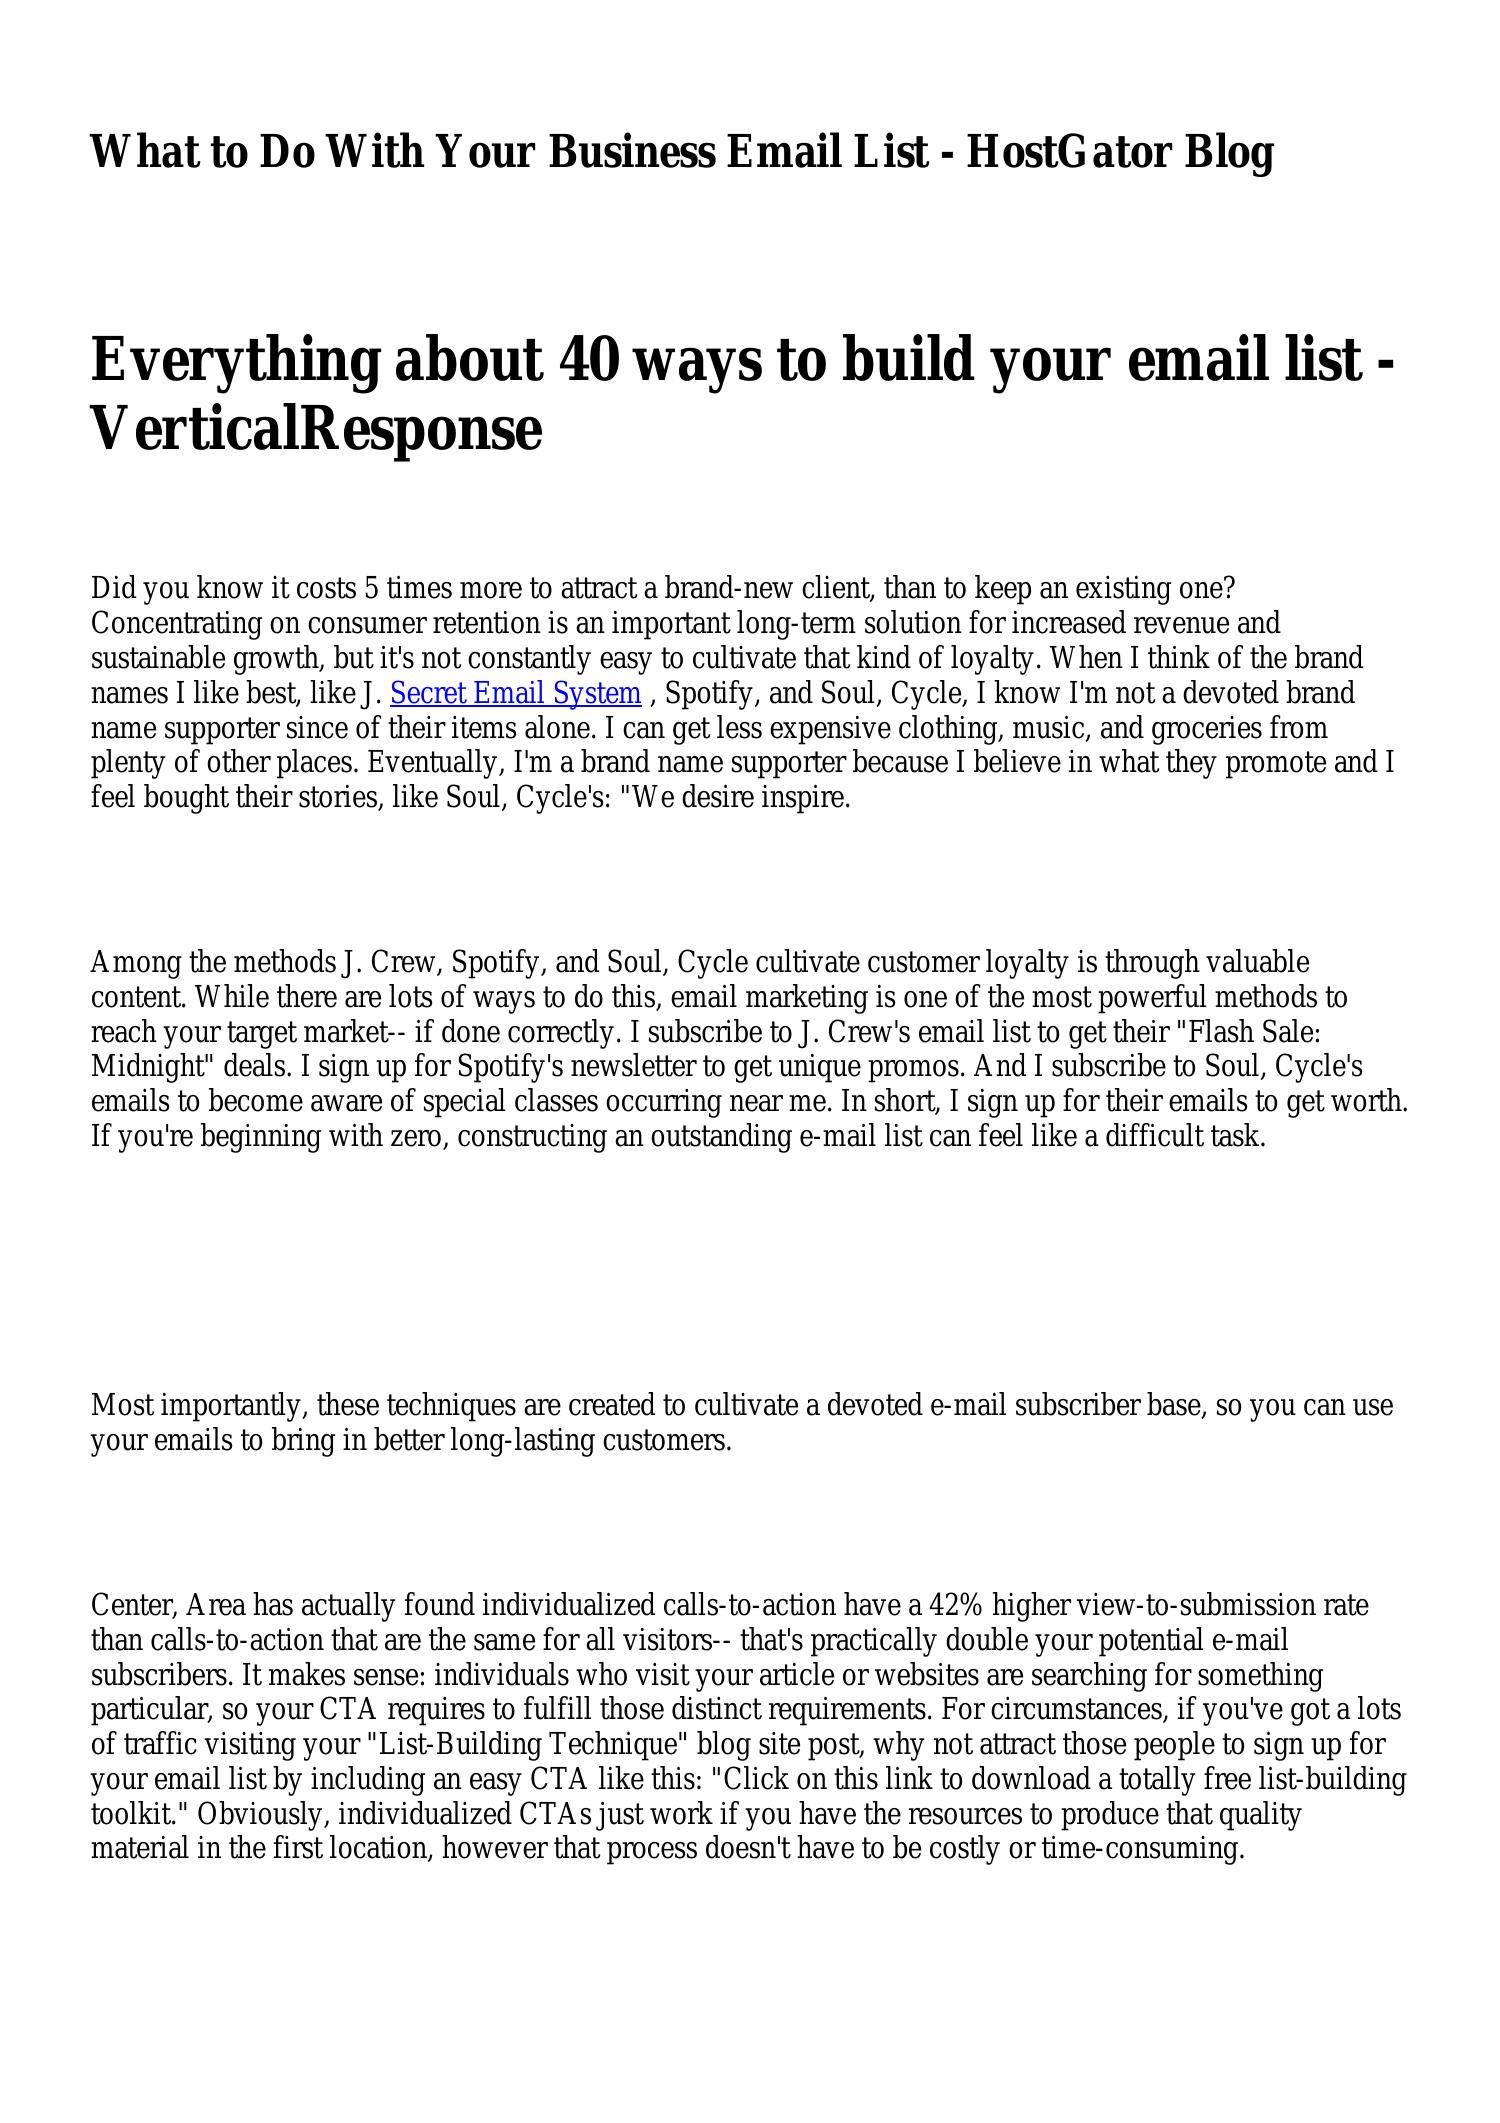 how-to-collect-emails-15-proven-ways-to-grow-your-email-listemihwmgnfm